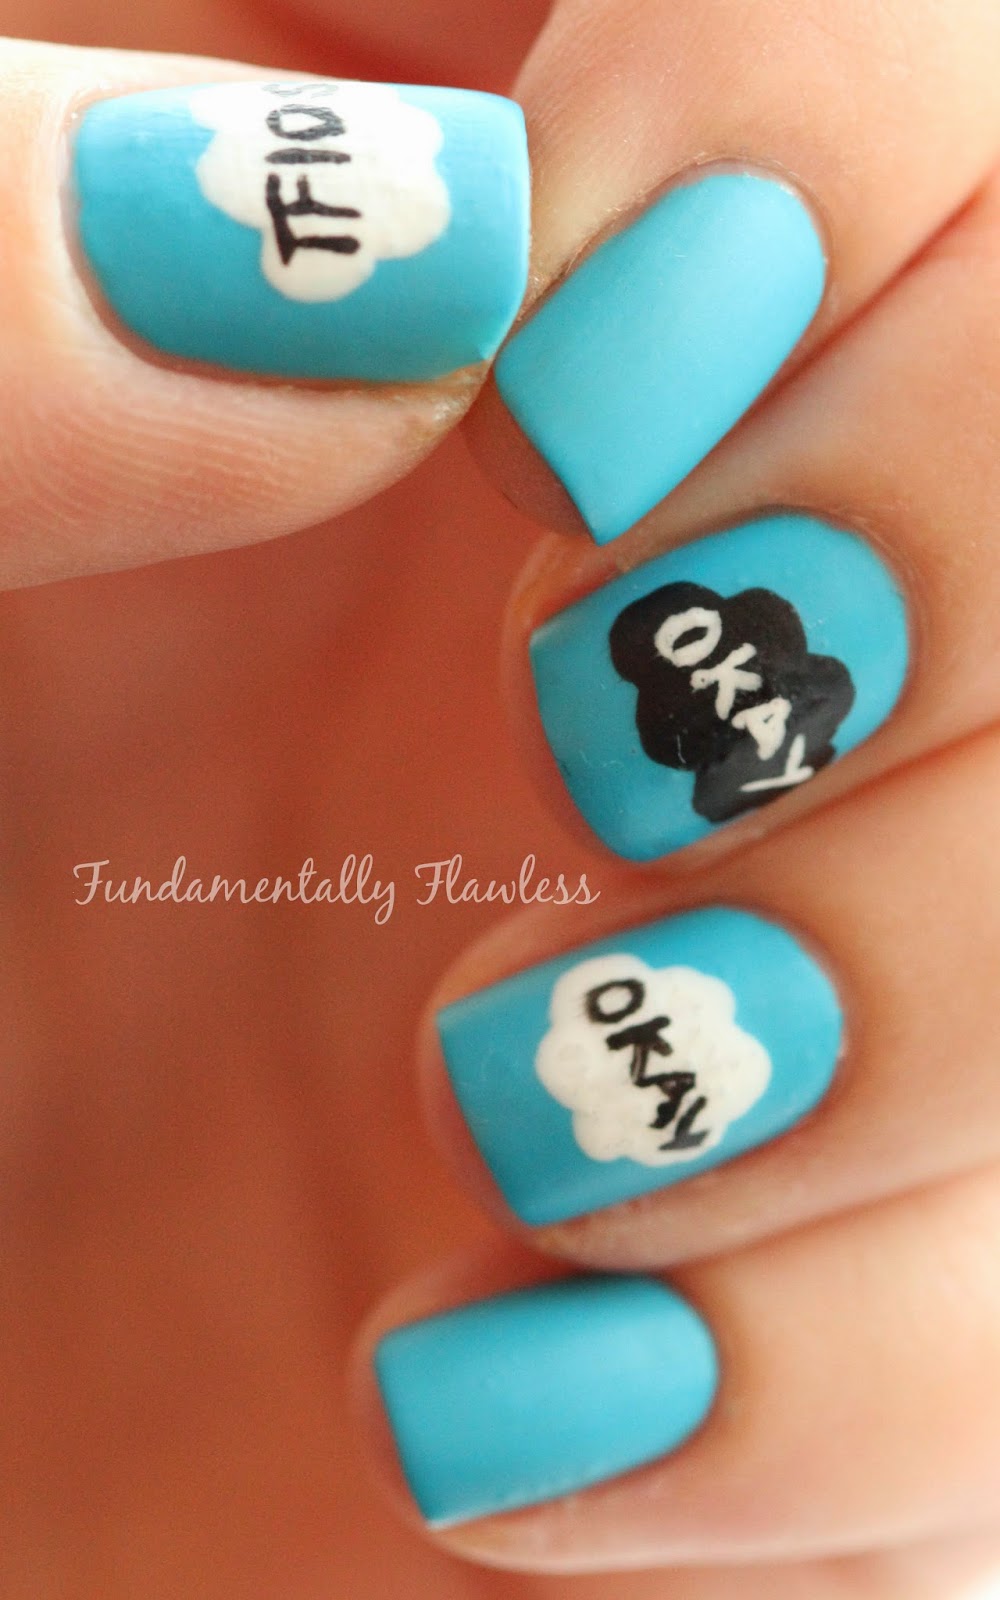 The Fault in Our Stars Nail Art